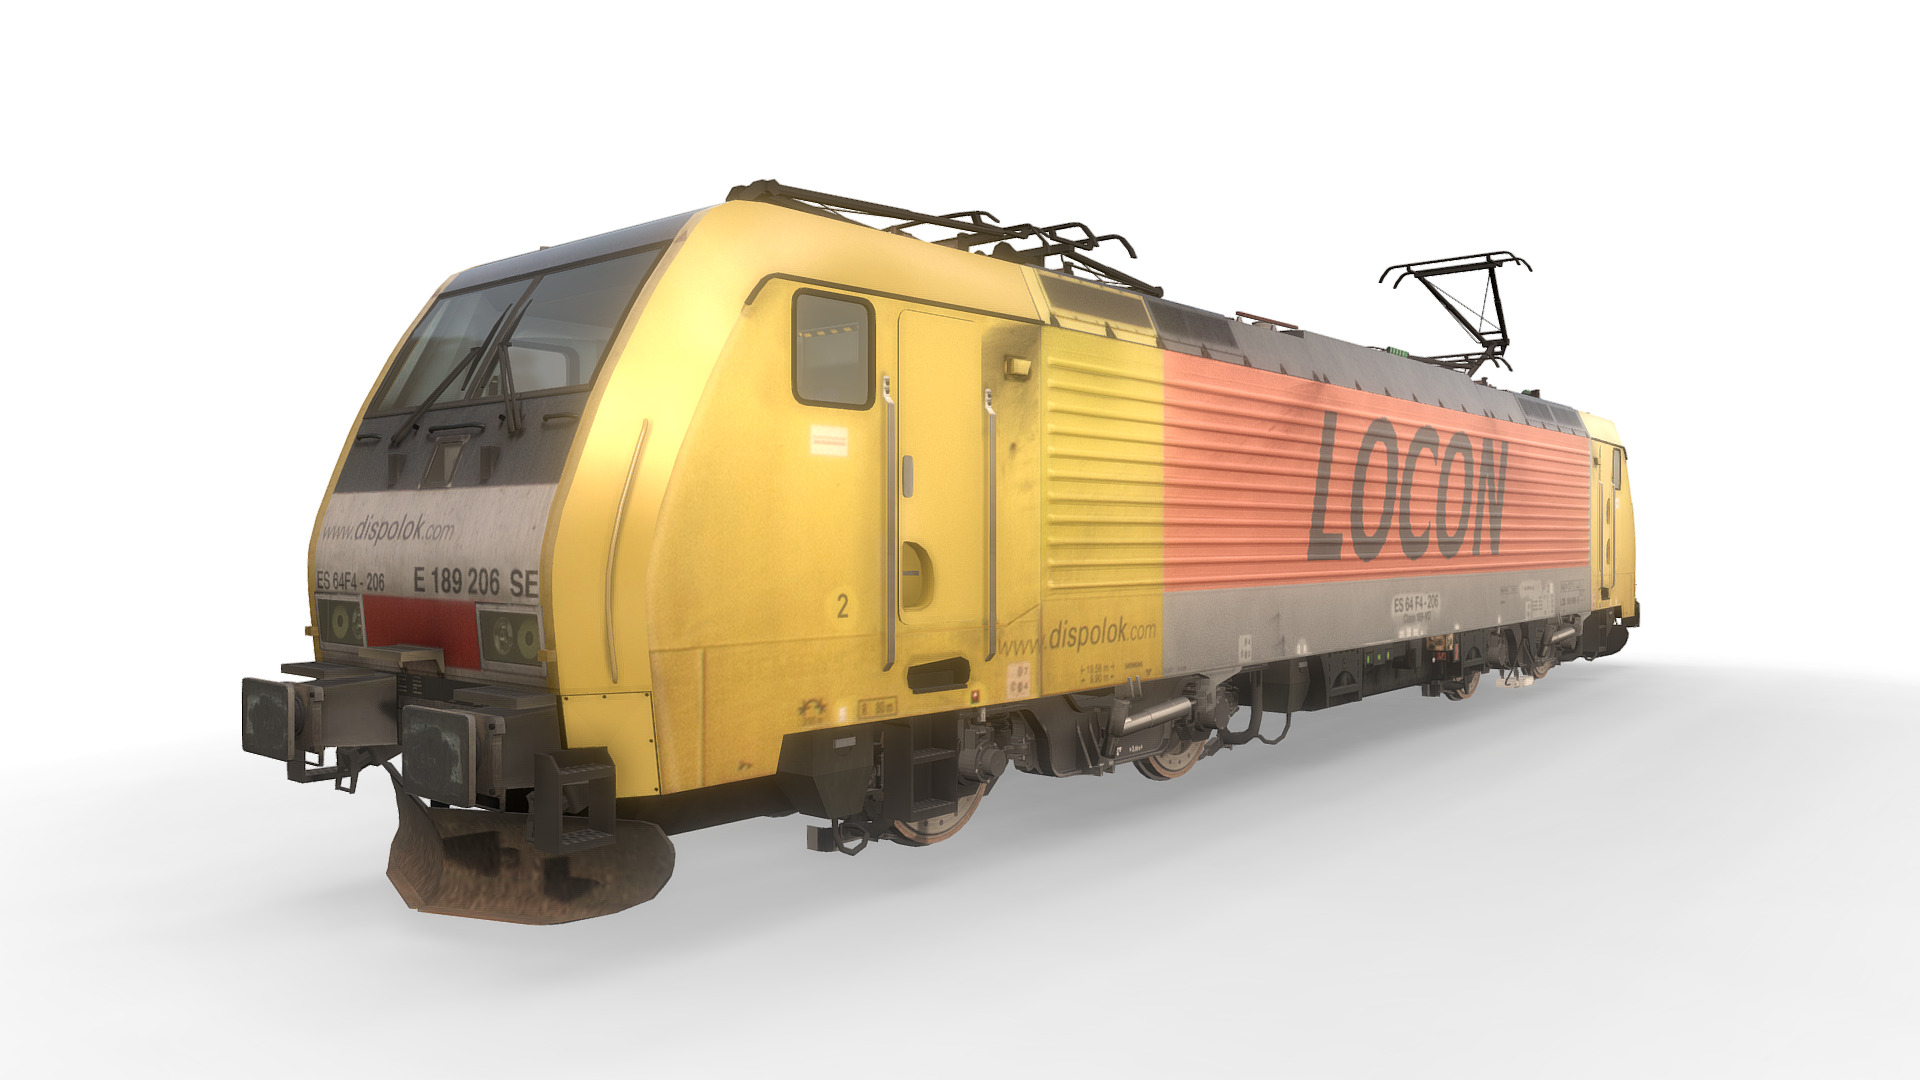 3D model Locomotive ES64F4 – 189 206-6 – Dispo / LOCON - This is a 3D model of the Locomotive ES64F4 - 189 206-6 - Dispo / LOCON. The 3D model is about a yellow and red train.